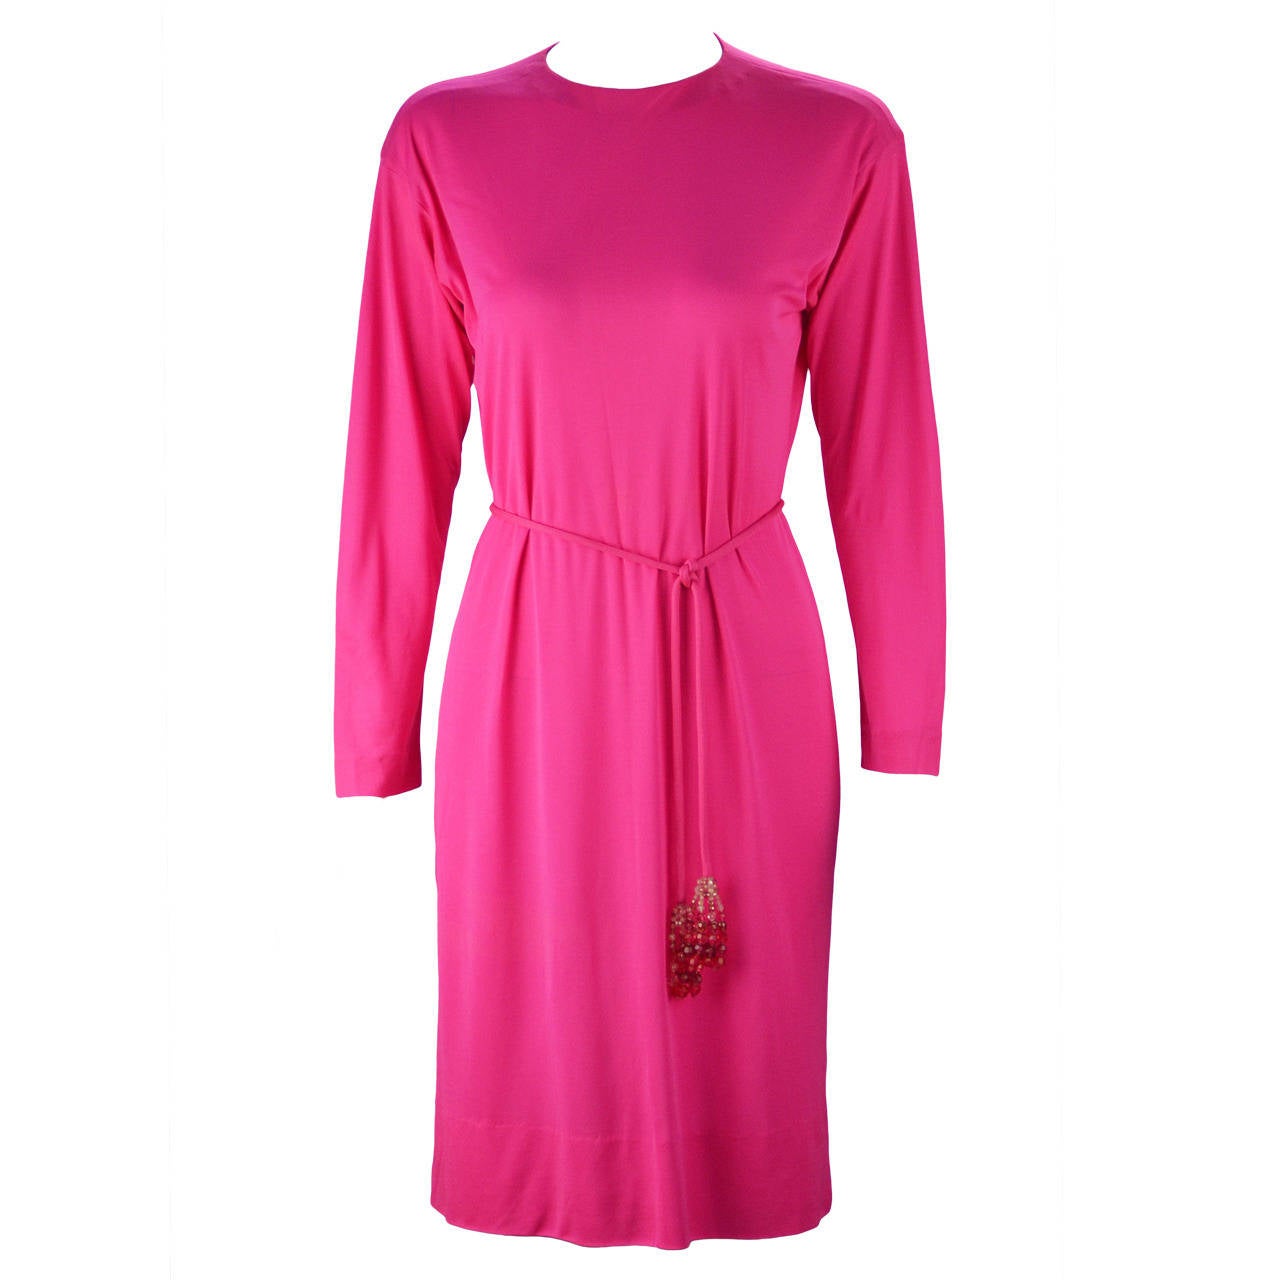 1960s Hot Pink Pucci Silk Knit Dress and Coppola e Toppo Belt